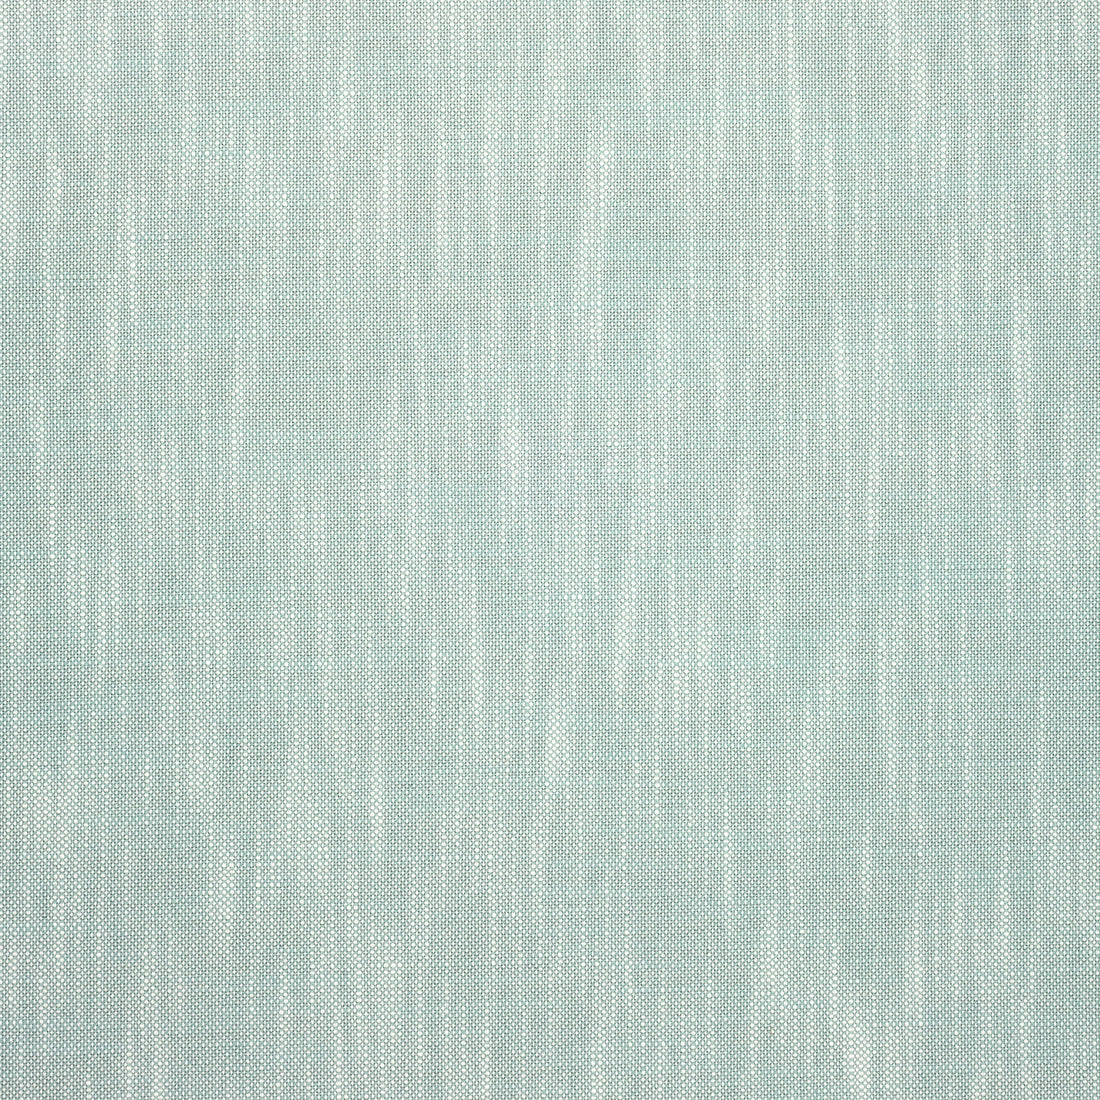 Bristol fabric in seafoam color - pattern number W73414 - by Thibaut in the Landmark Textures collection